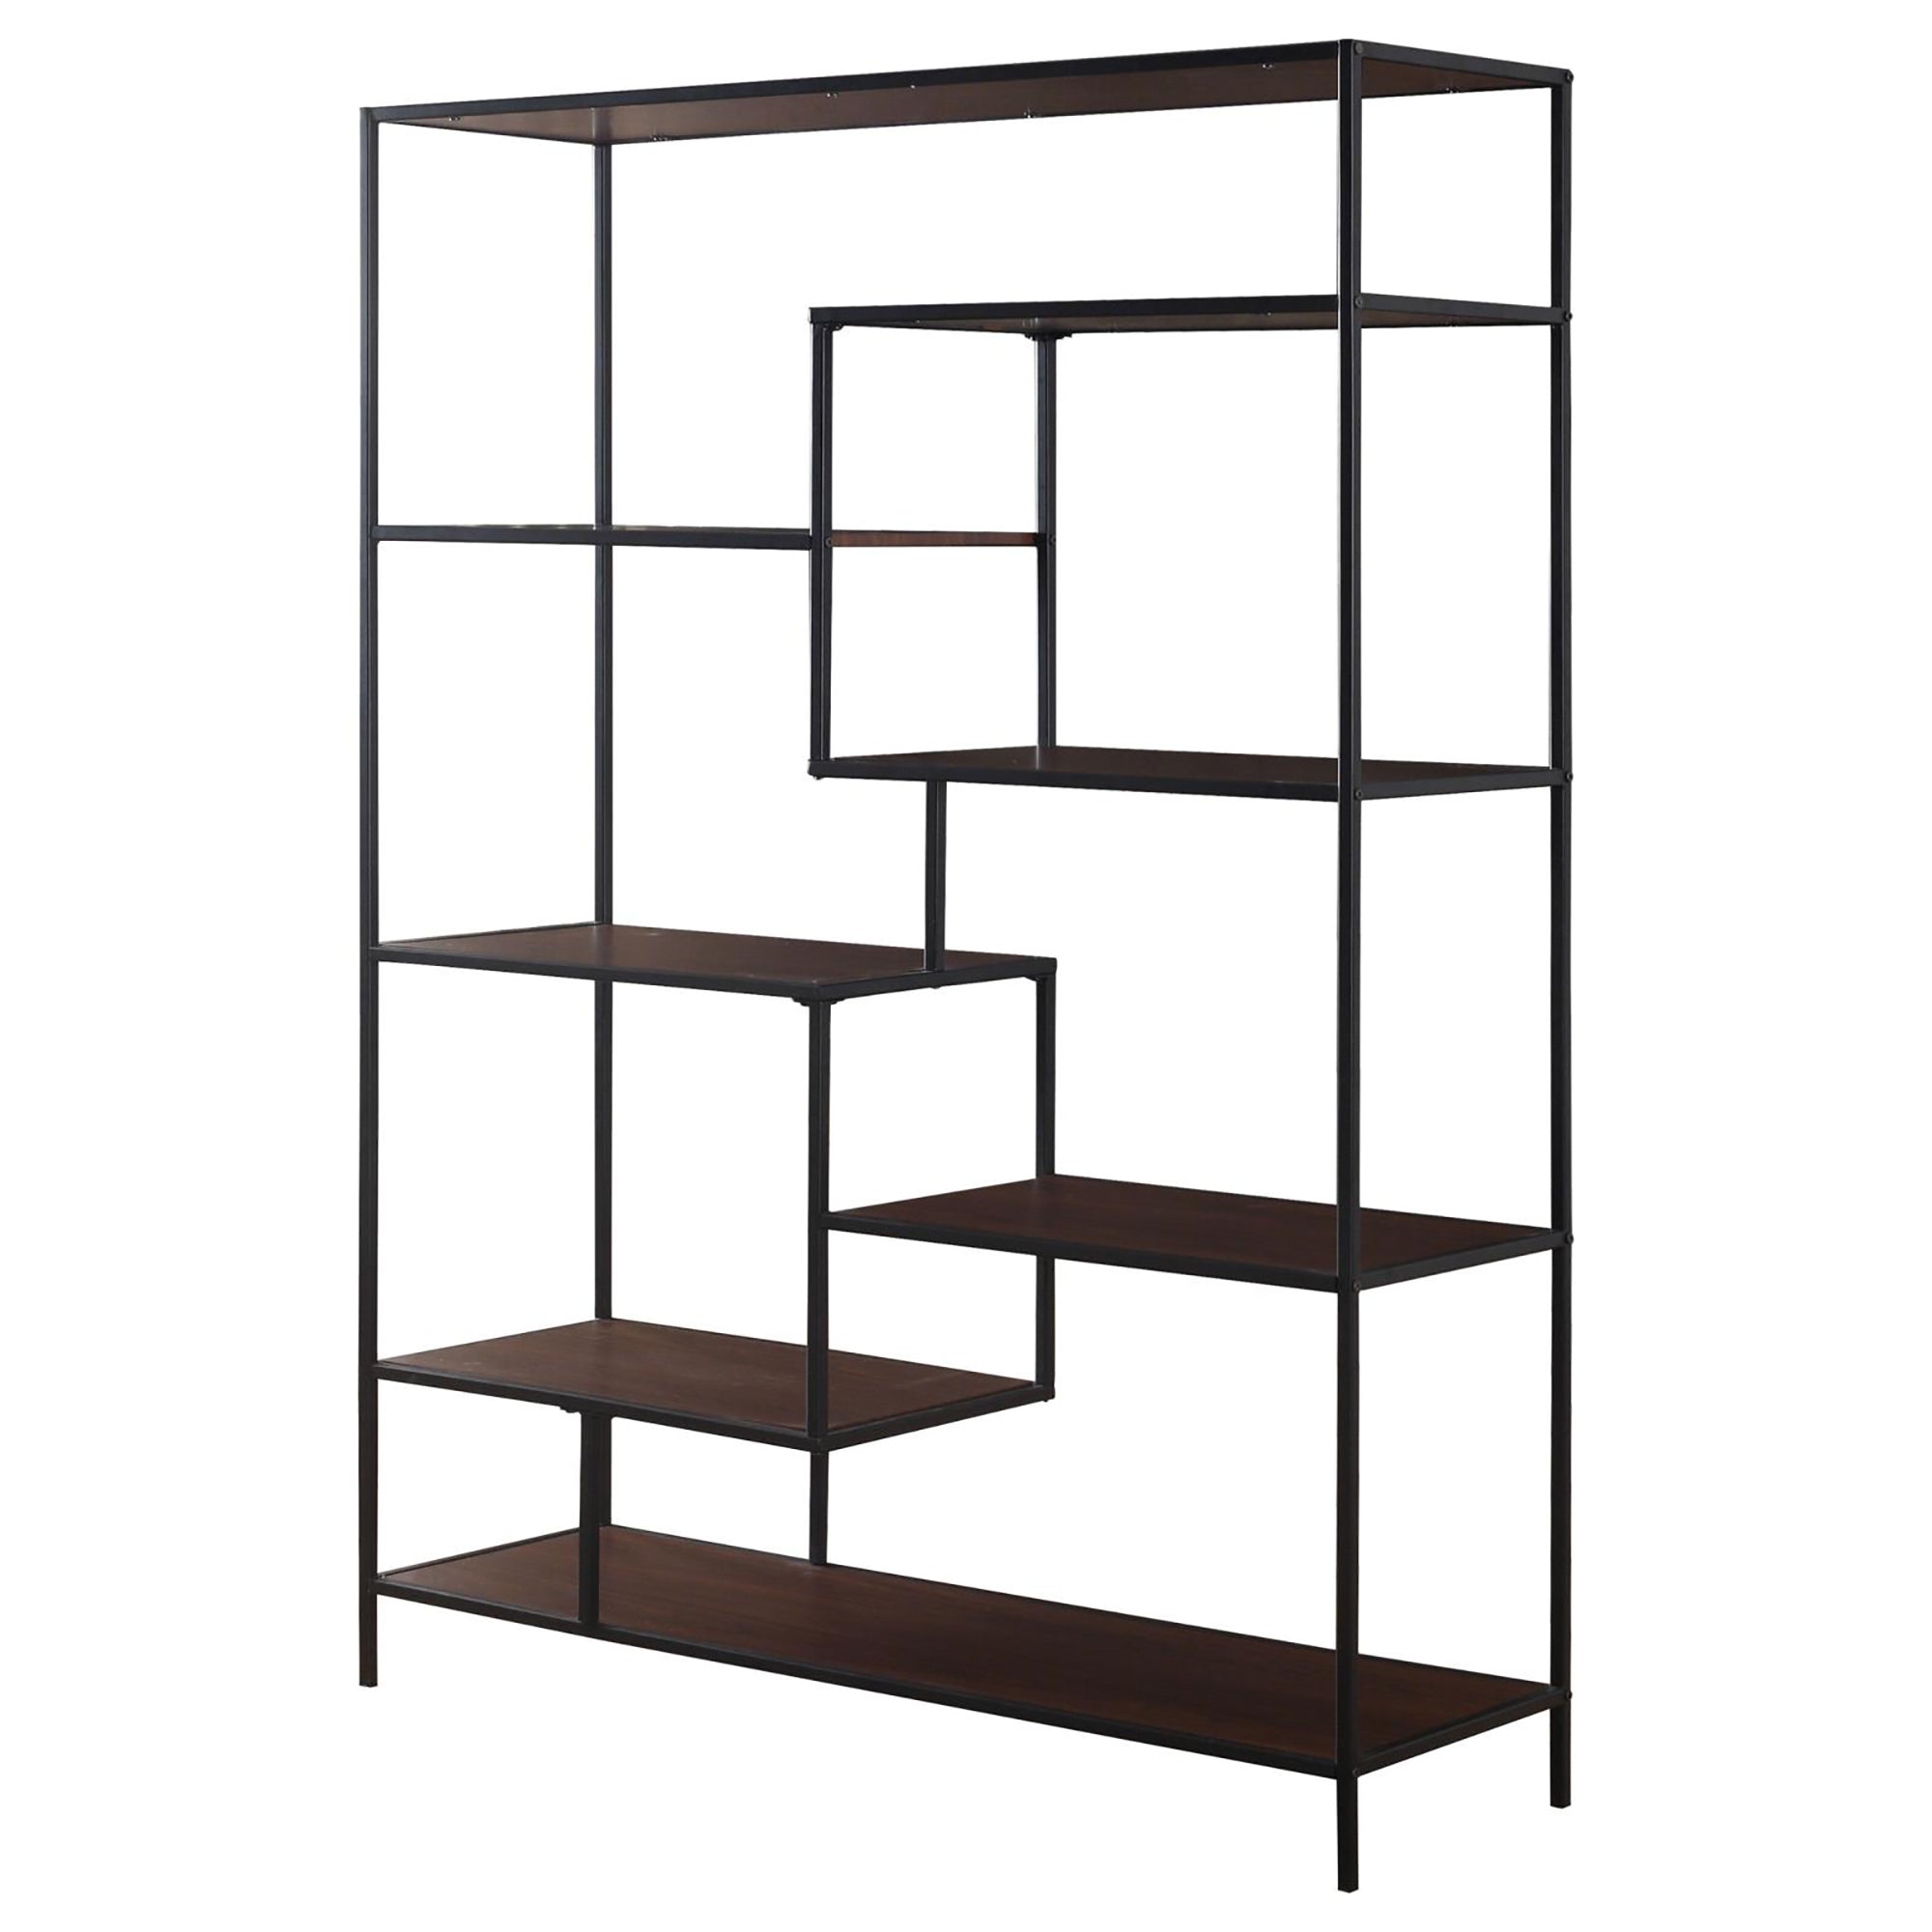 Walnut and Black Staggered Tier Bookcase